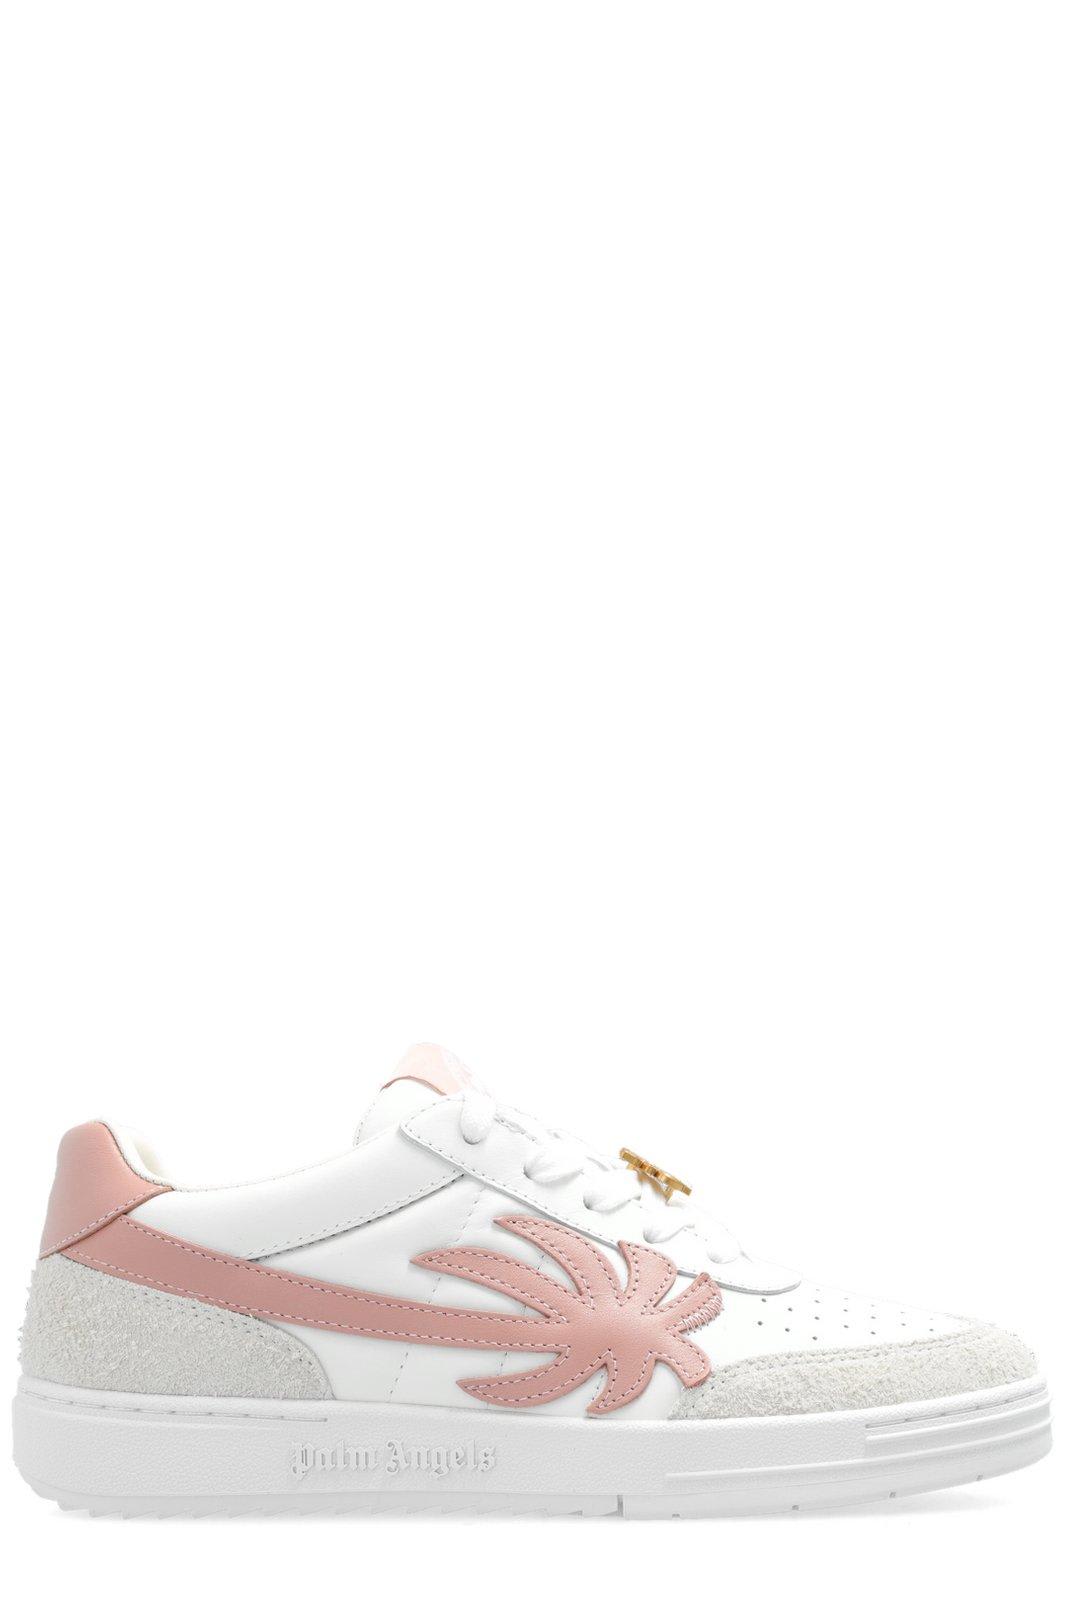 Palm Angels Palm Beach University Low-top Sneakers